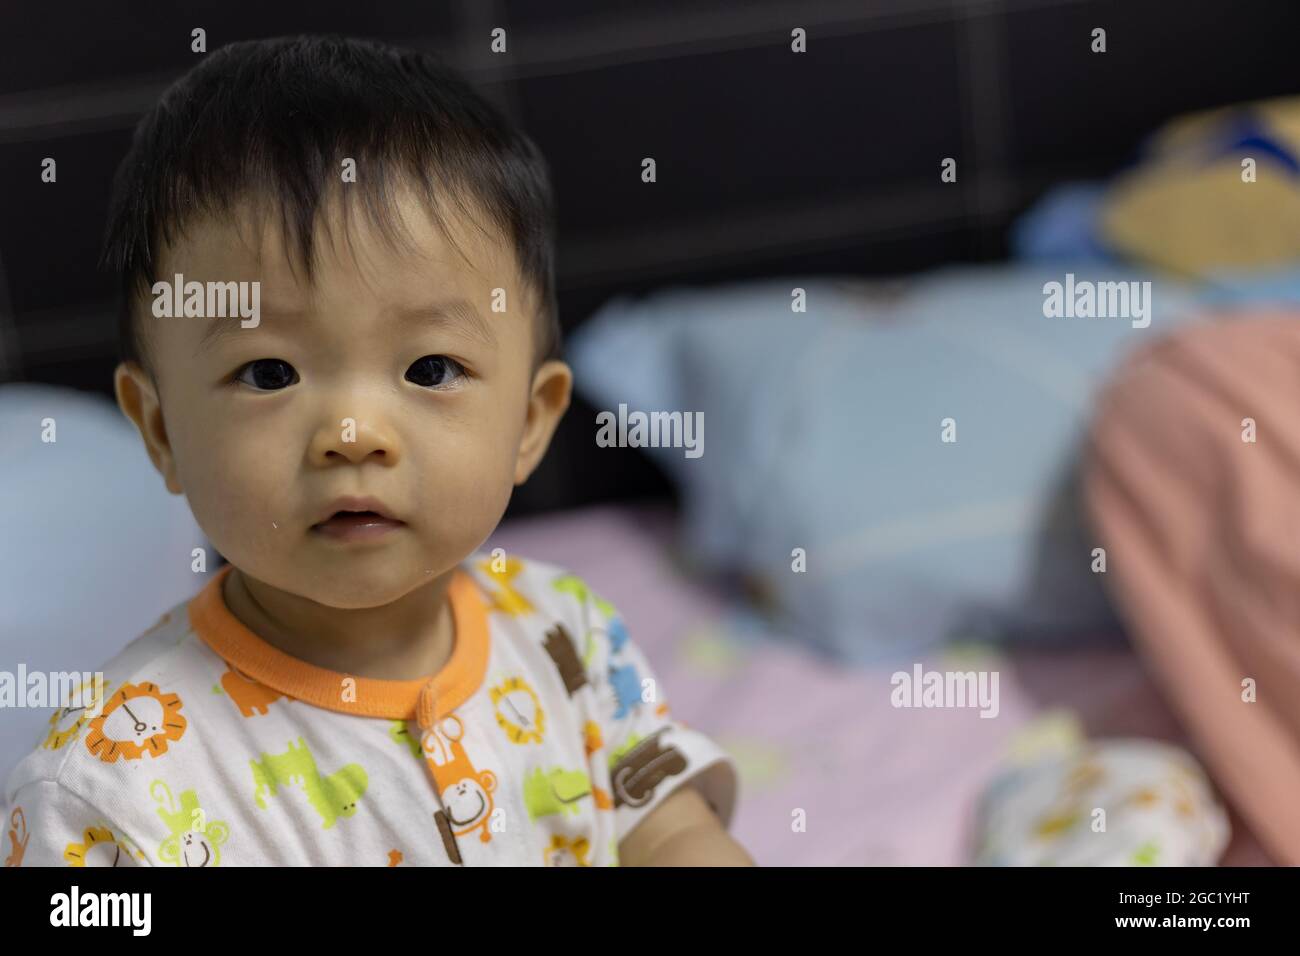 Portrait image of cute and joyful 1 years old baby boy on bed. Stock Photo